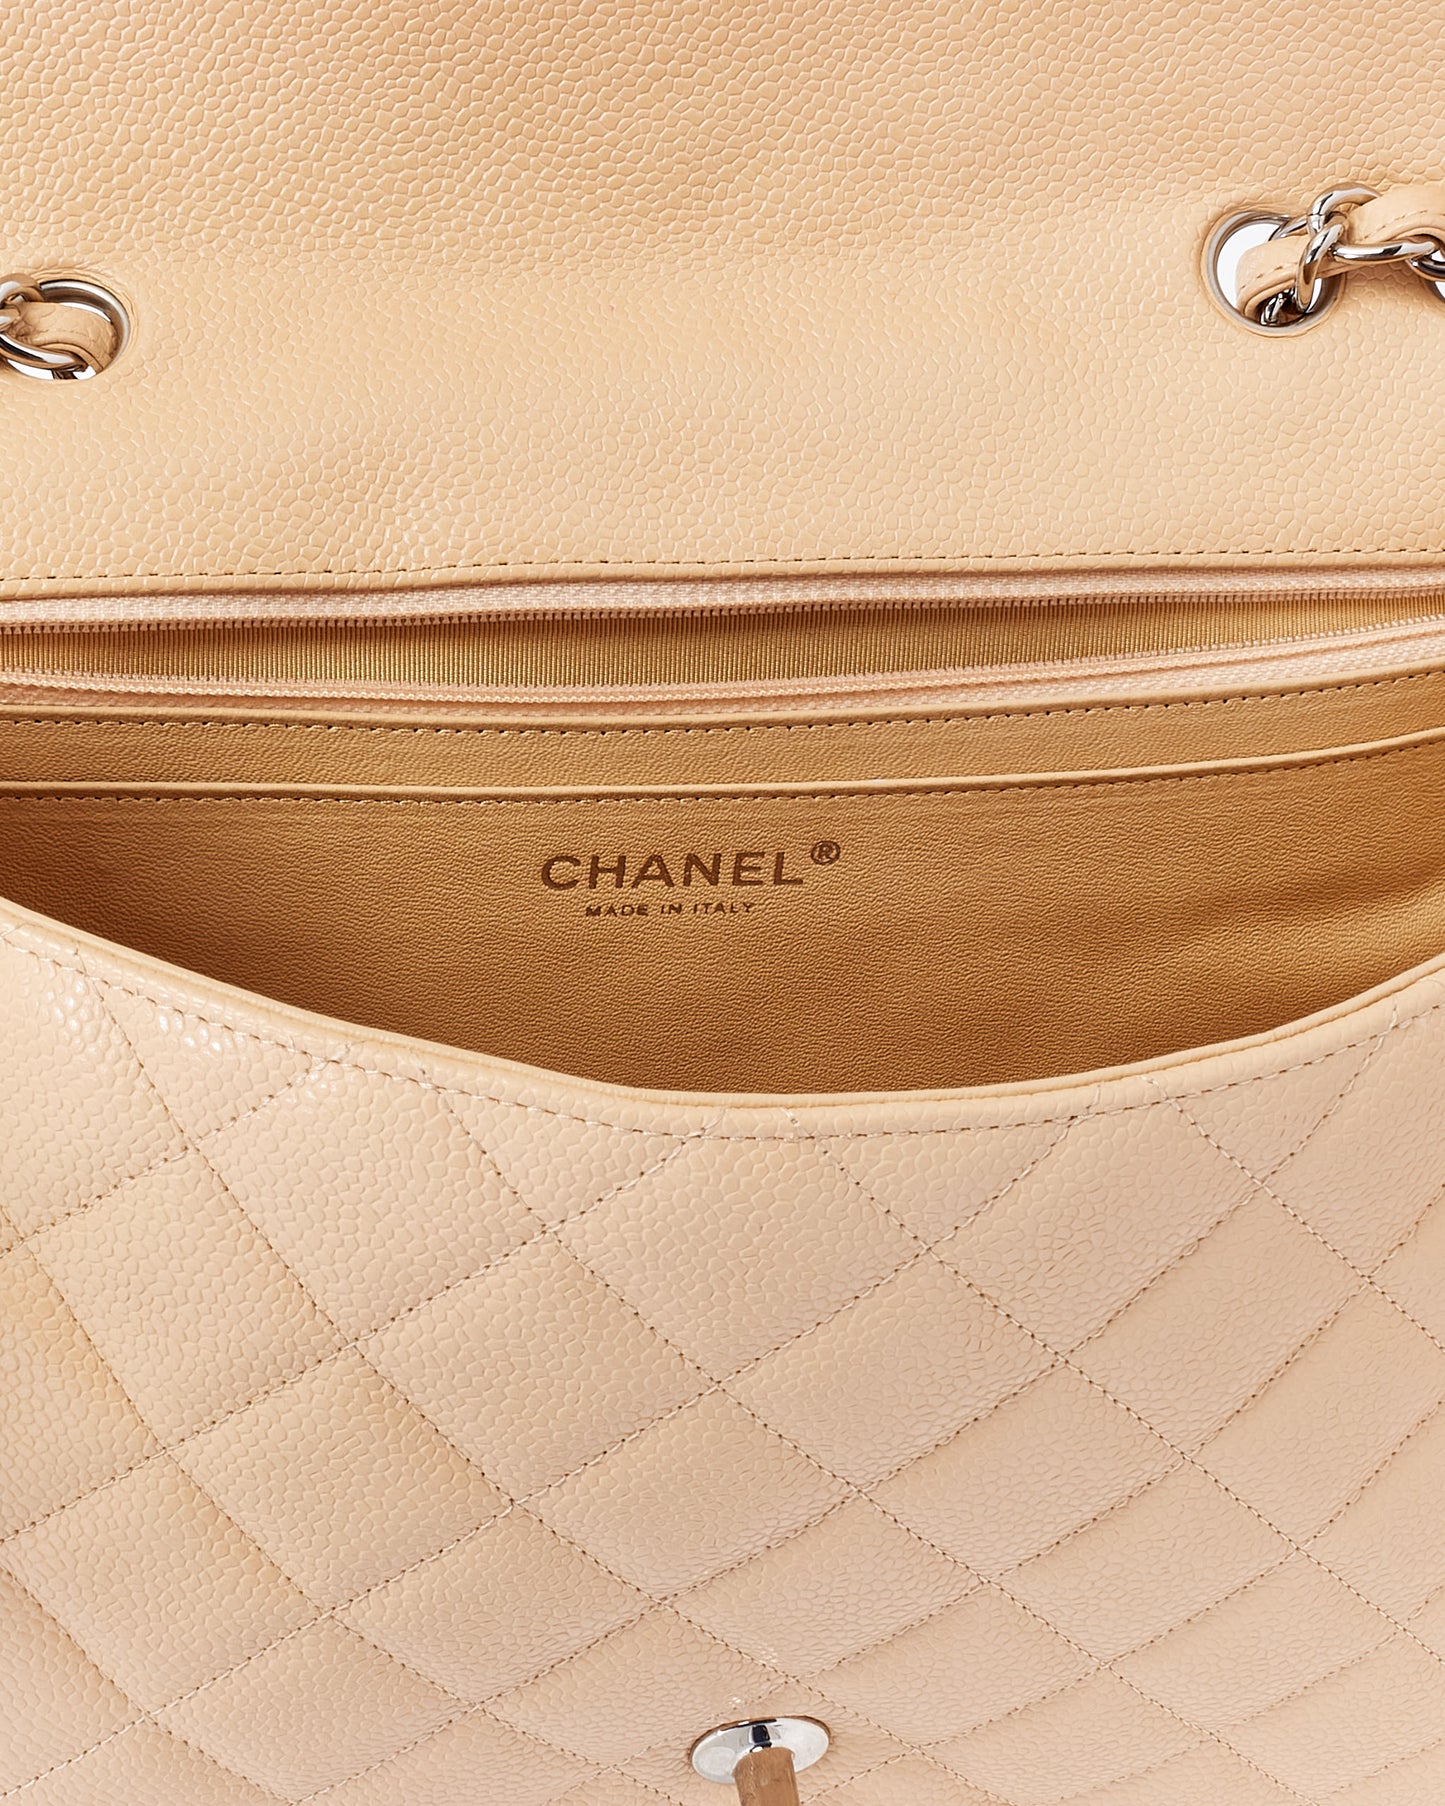 Chanel Beige Quilted Caviar Leather Jumbo Single Flap Bag with Silver Hardware